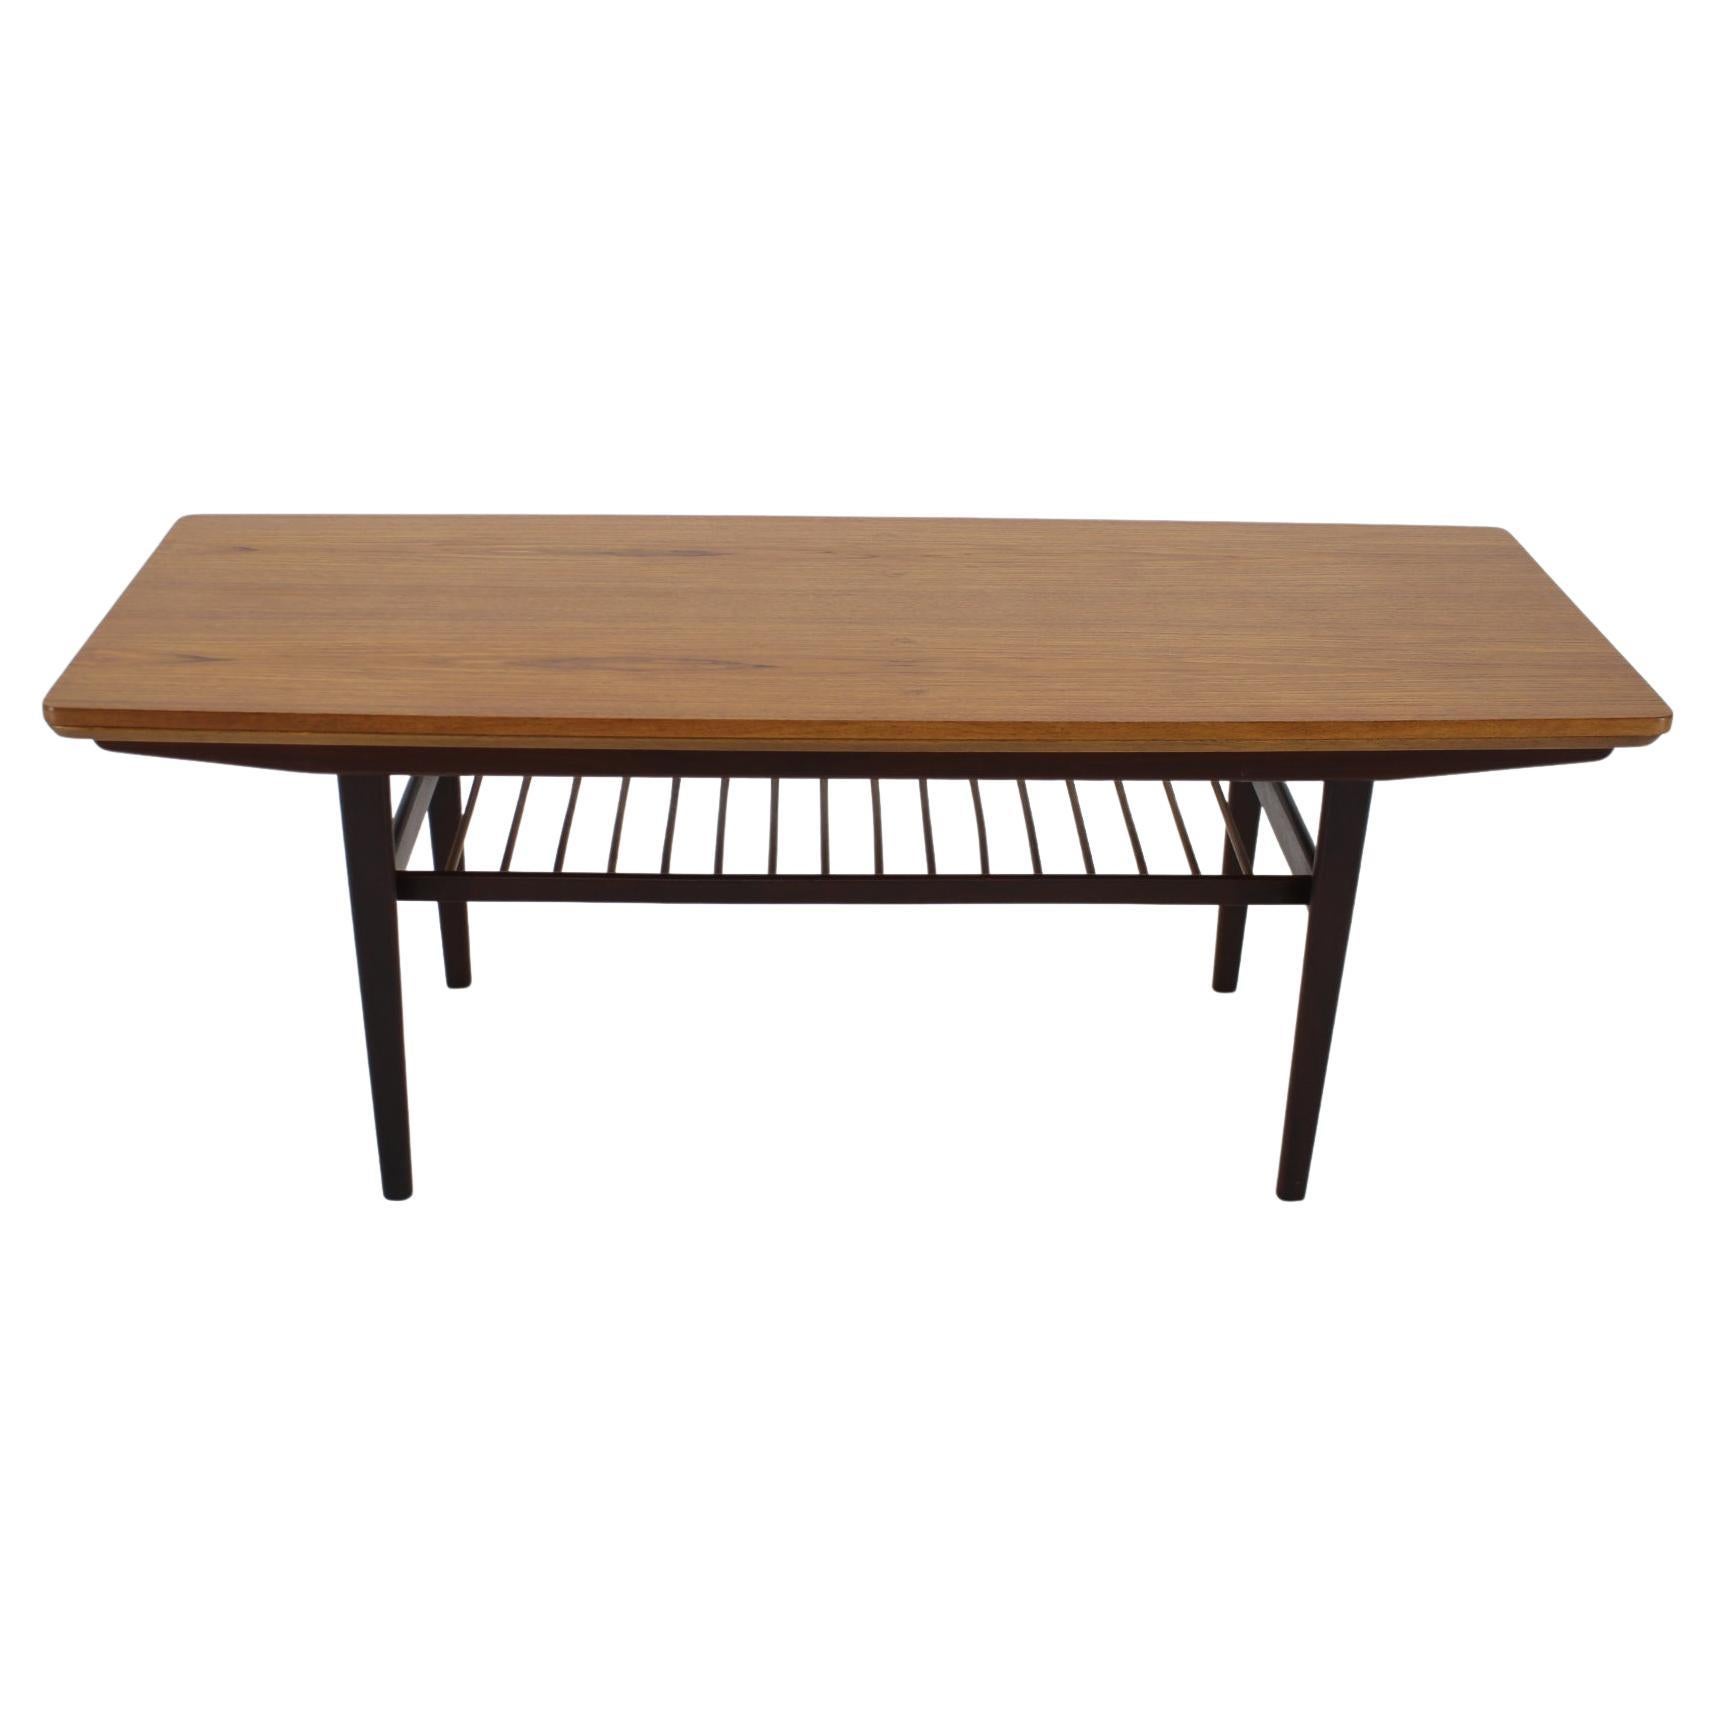 1960s Danish Teak Adjustable and Extendable Coffee Table, Denmark  For Sale